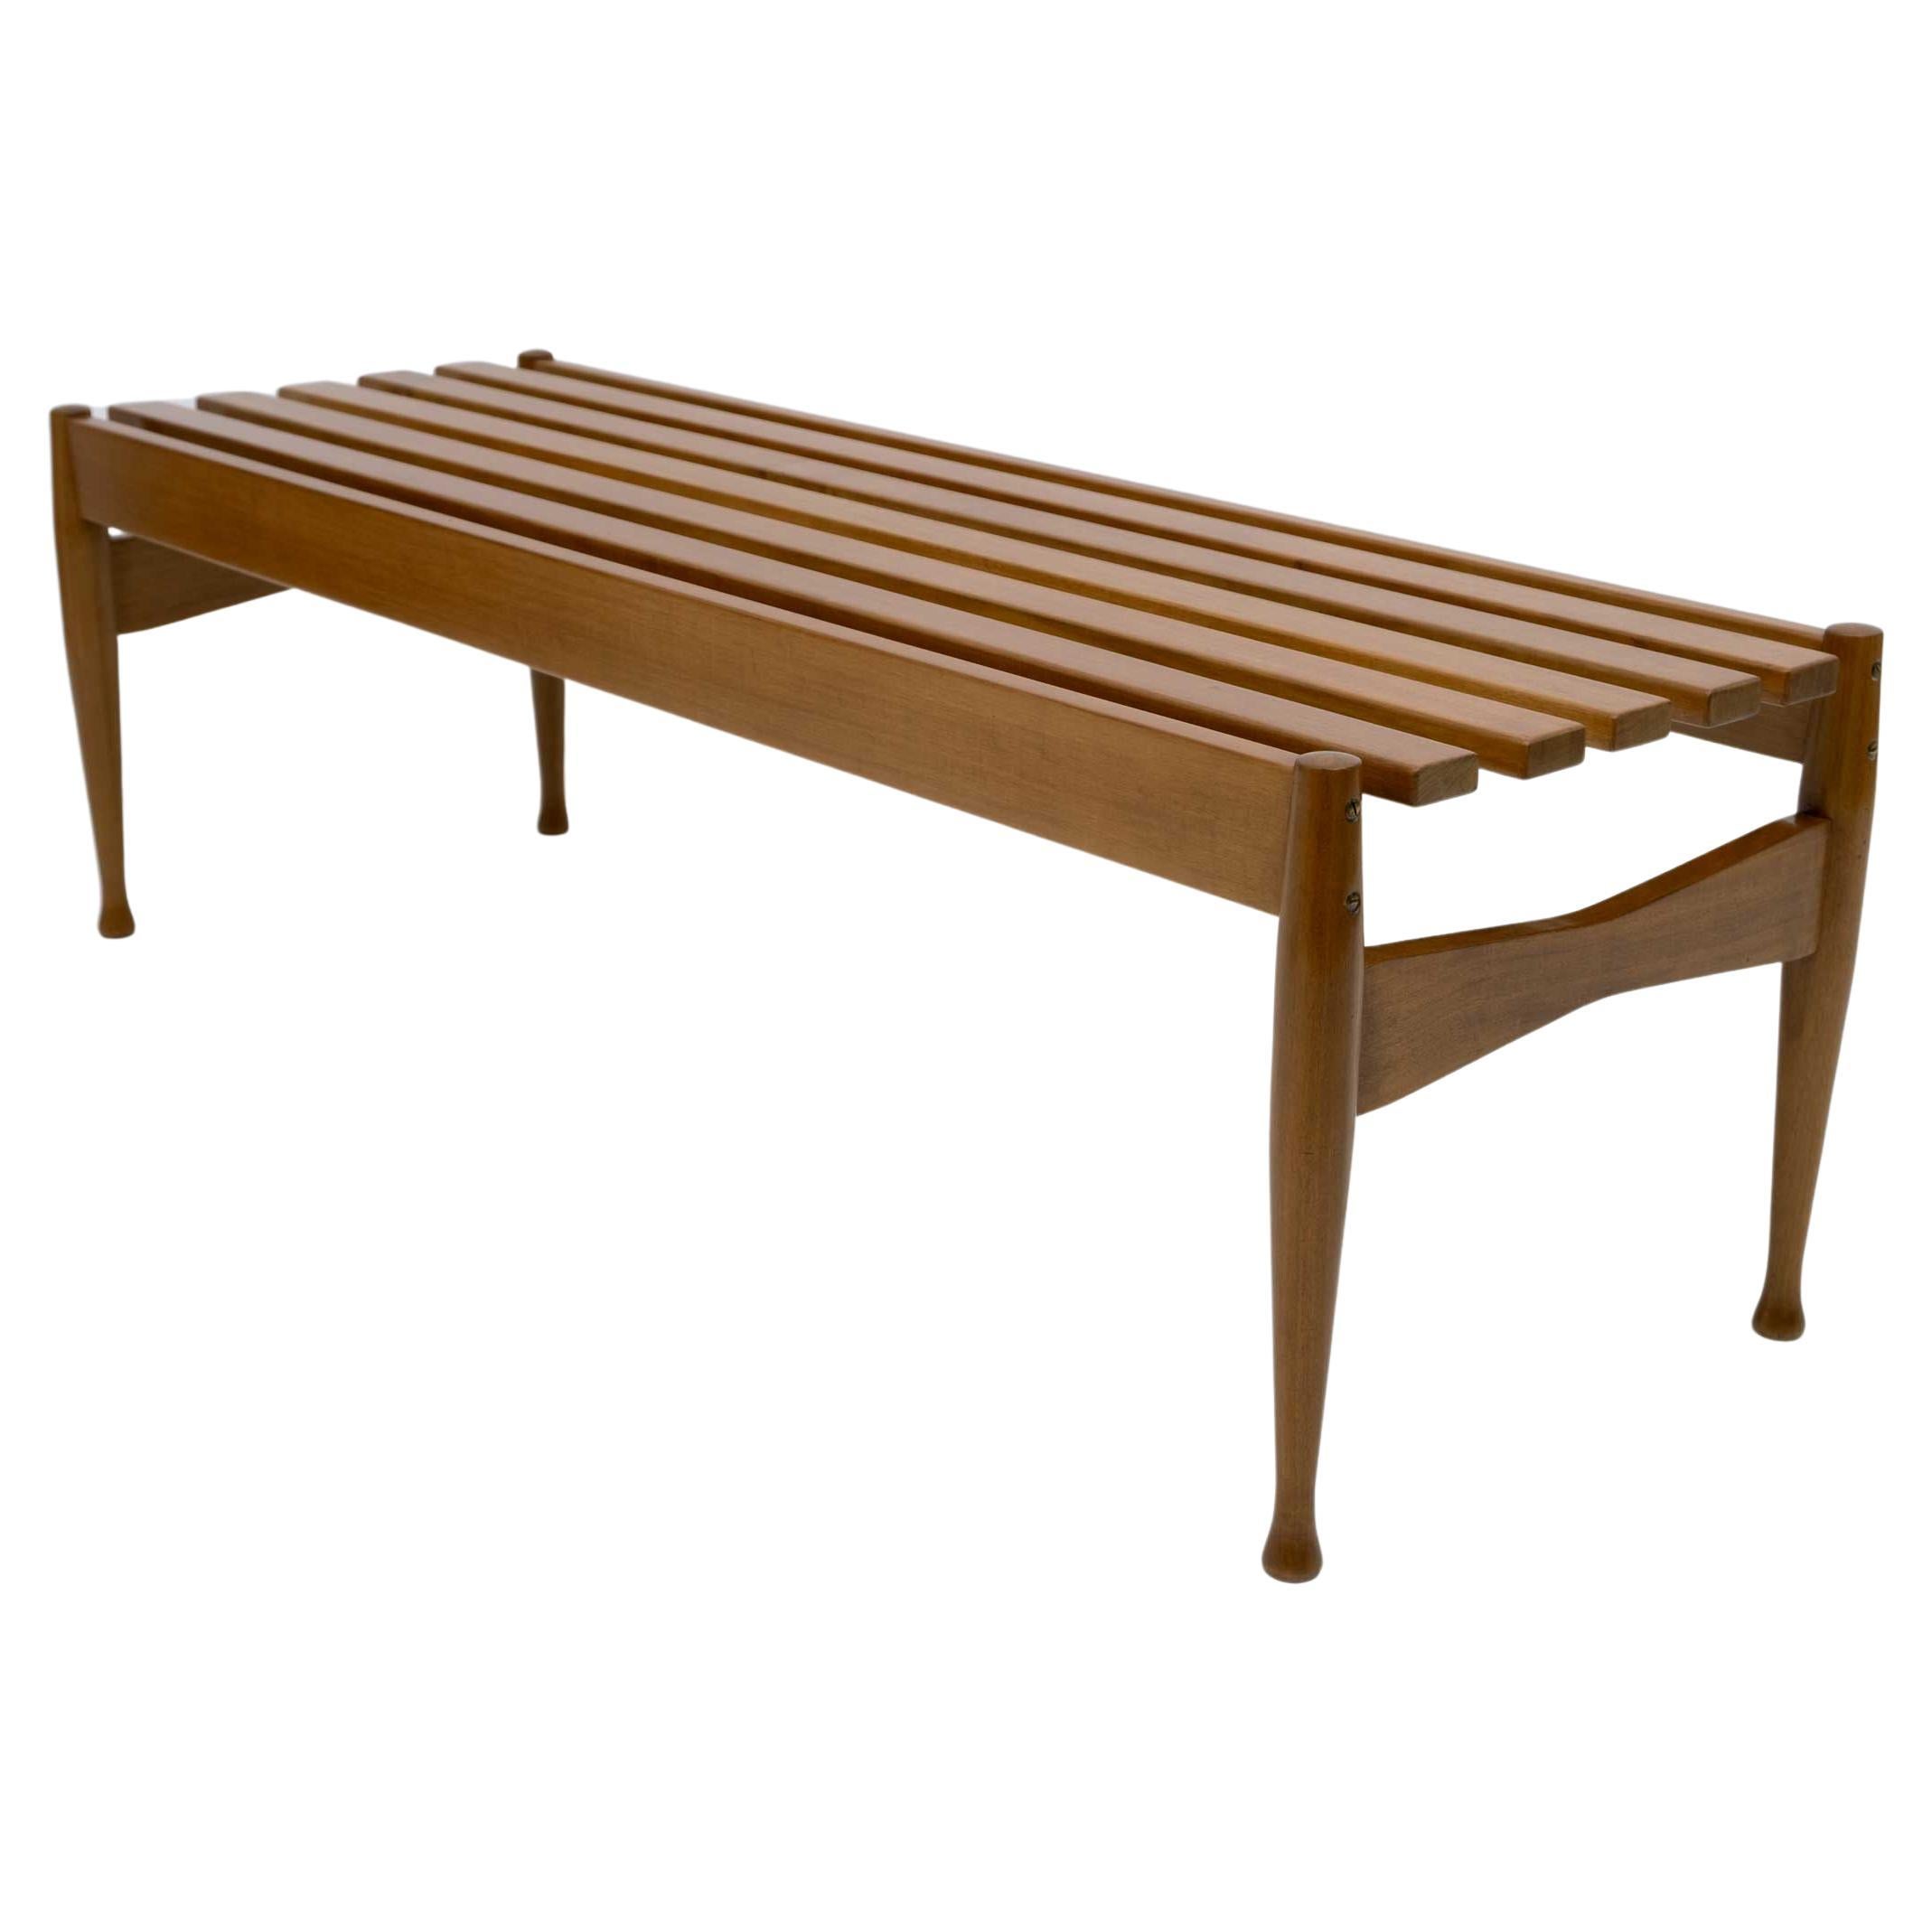 Attributed Giò Ponti Mid-century Modern Italian Bench for Fratelli Reguitti, 50s For Sale